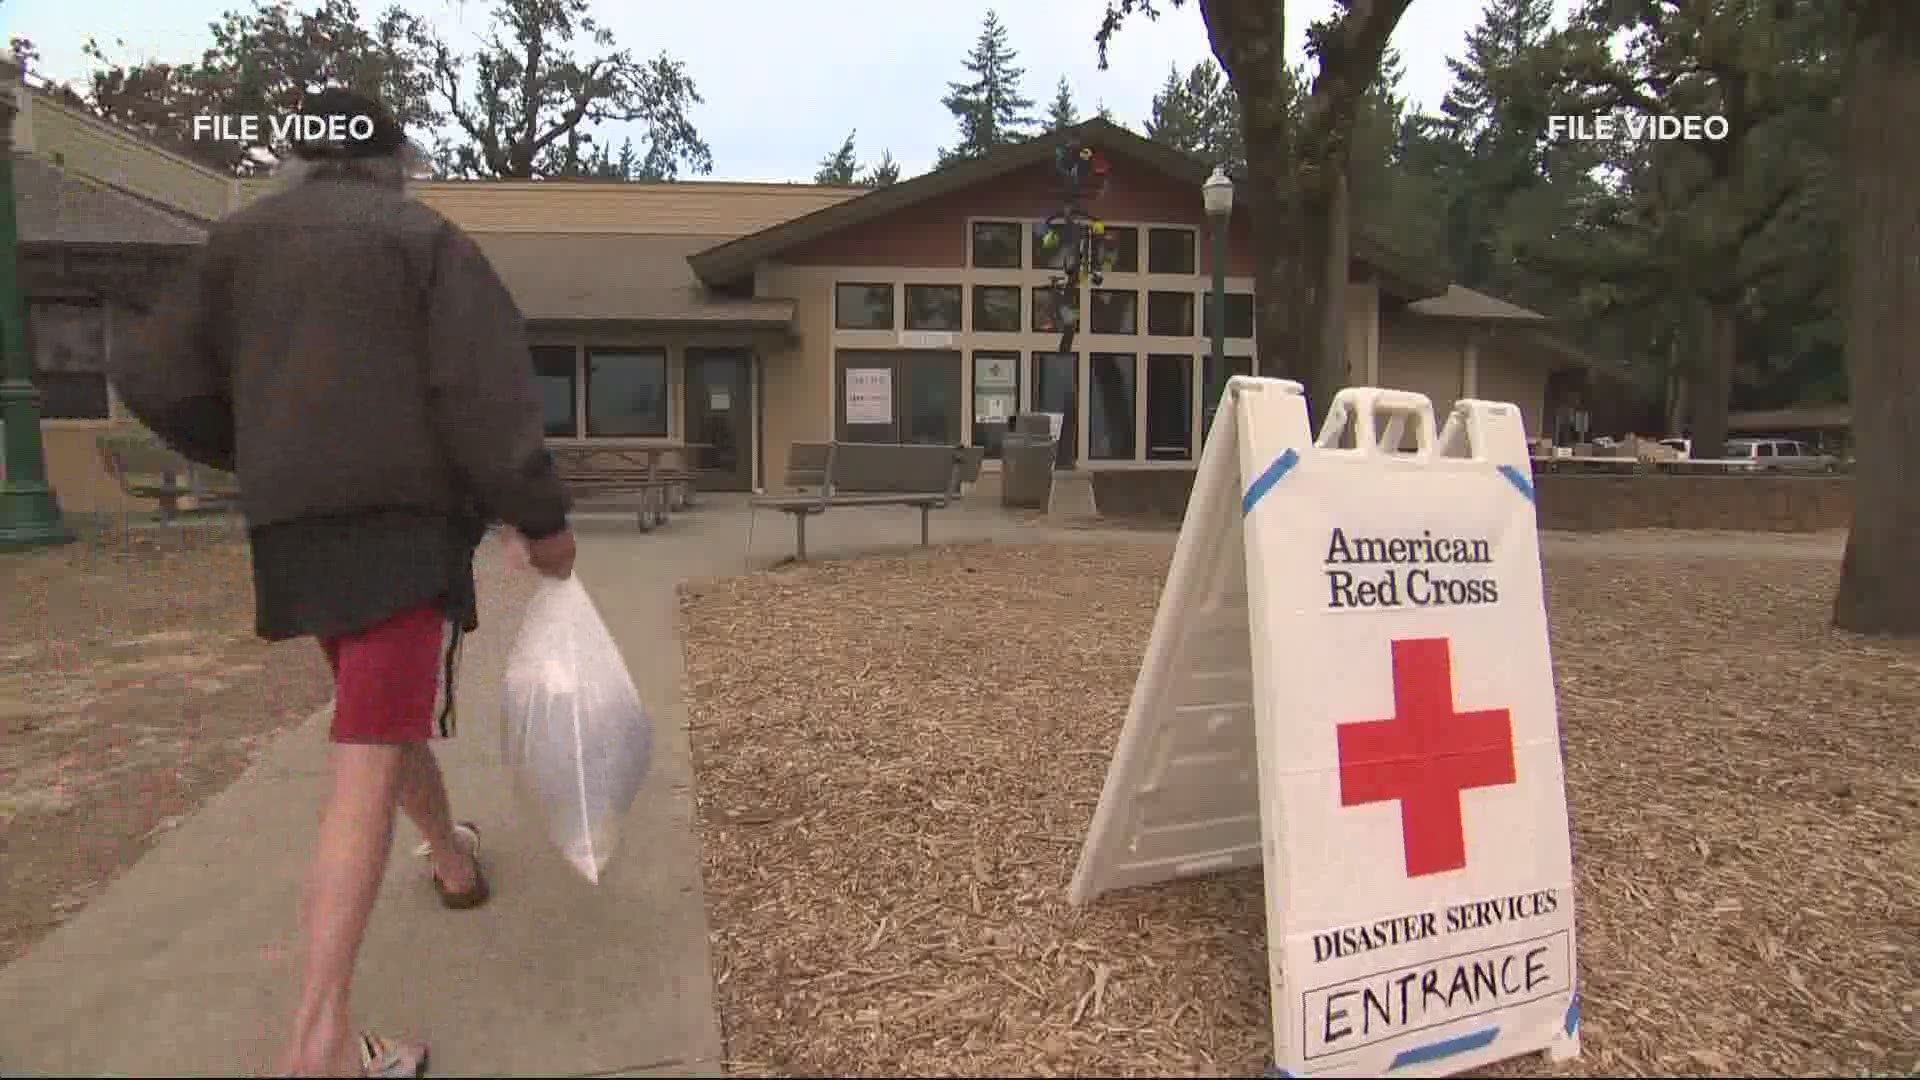 Experts say this year's fire season is expected to be worse than usual, just when COVID-19 shrunk the Red Cross' volunteer pool by hundreds of thousands.